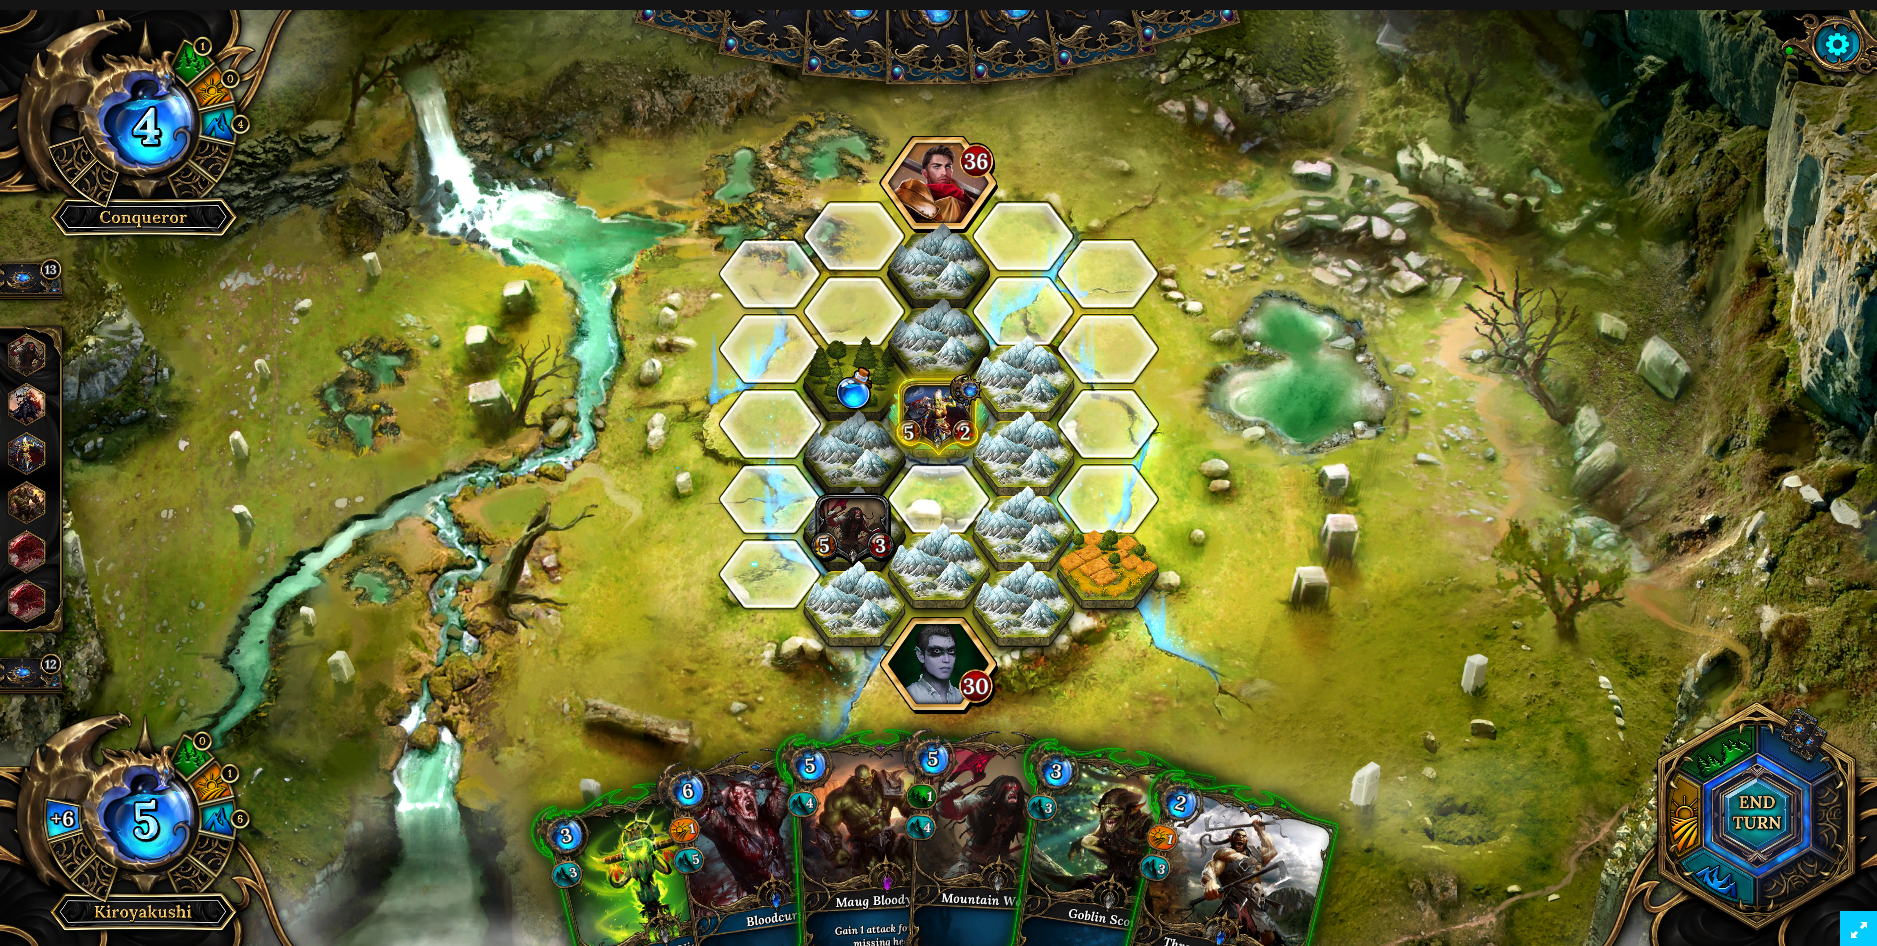 Screen z gry Legends of Elysium.